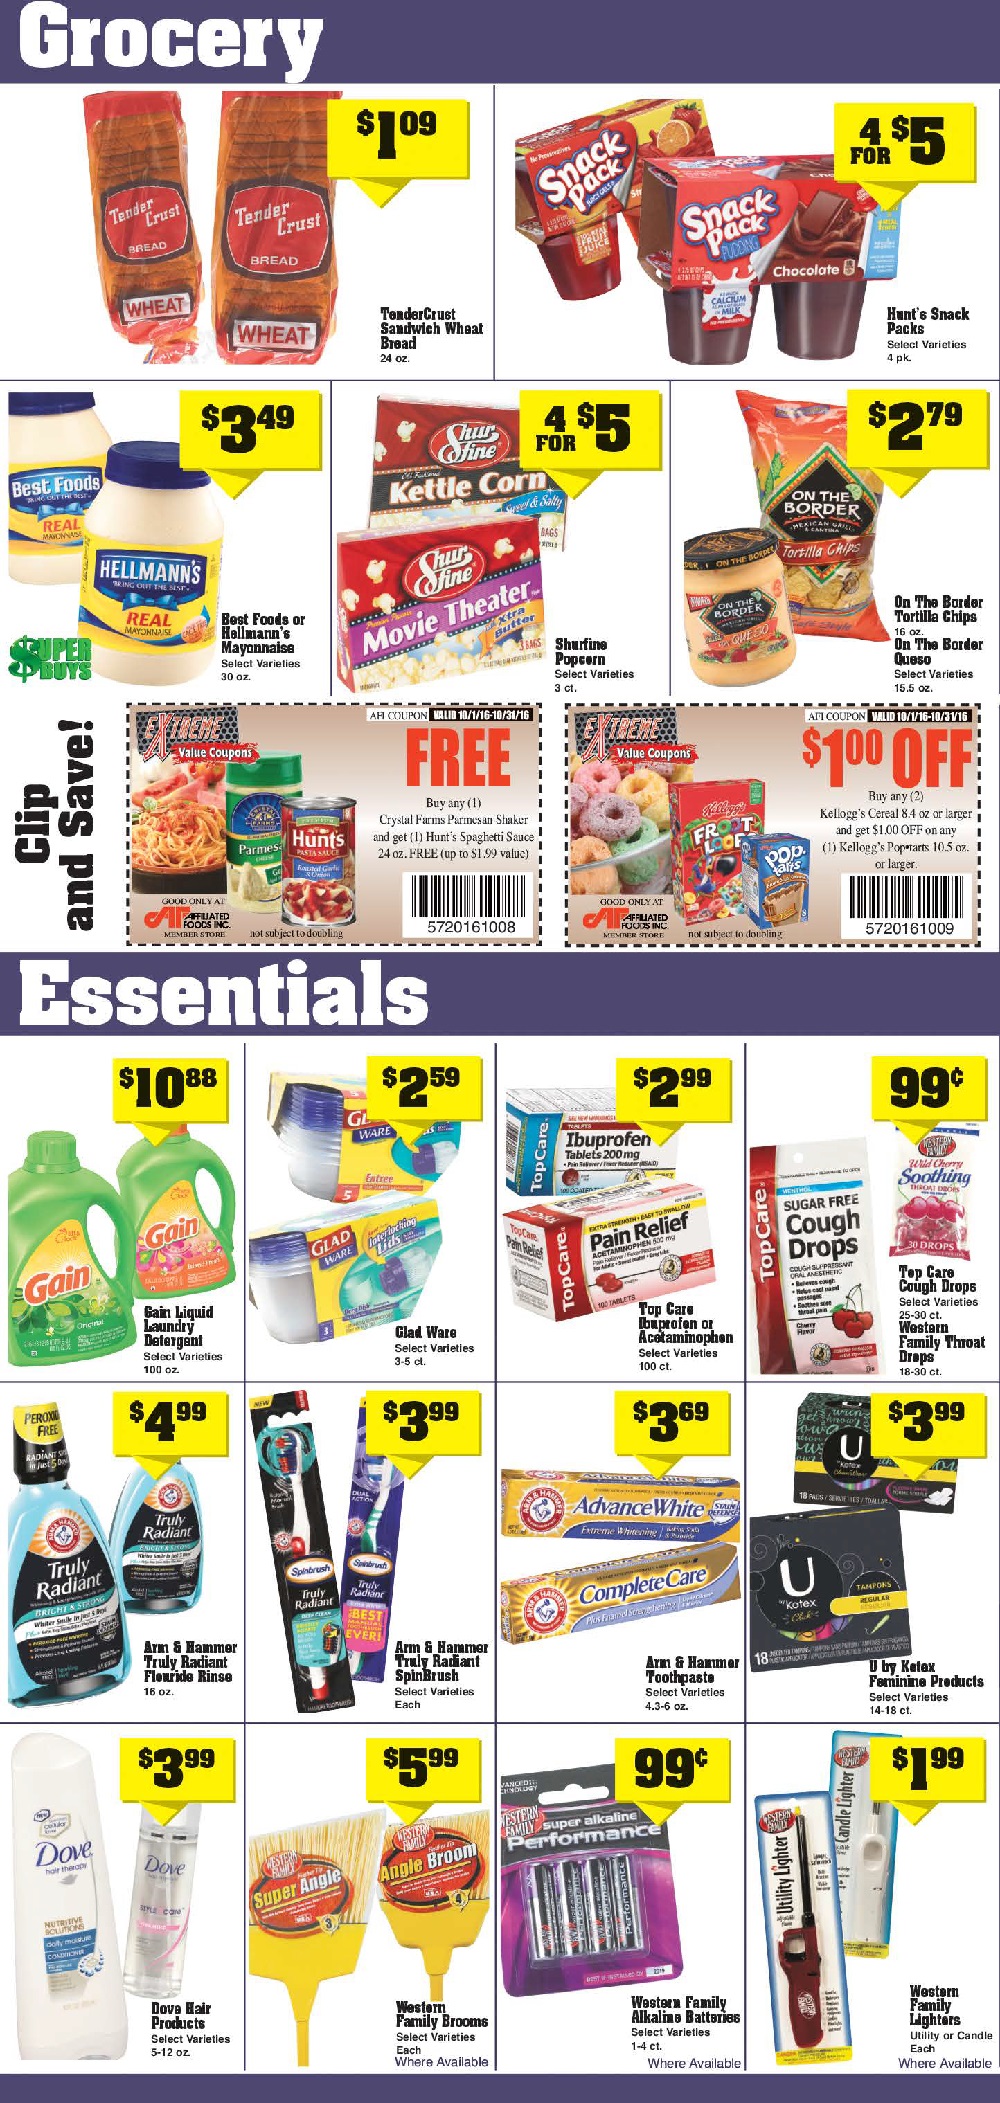 weekly-sales-for-oct-26th-nov-1st-pg2